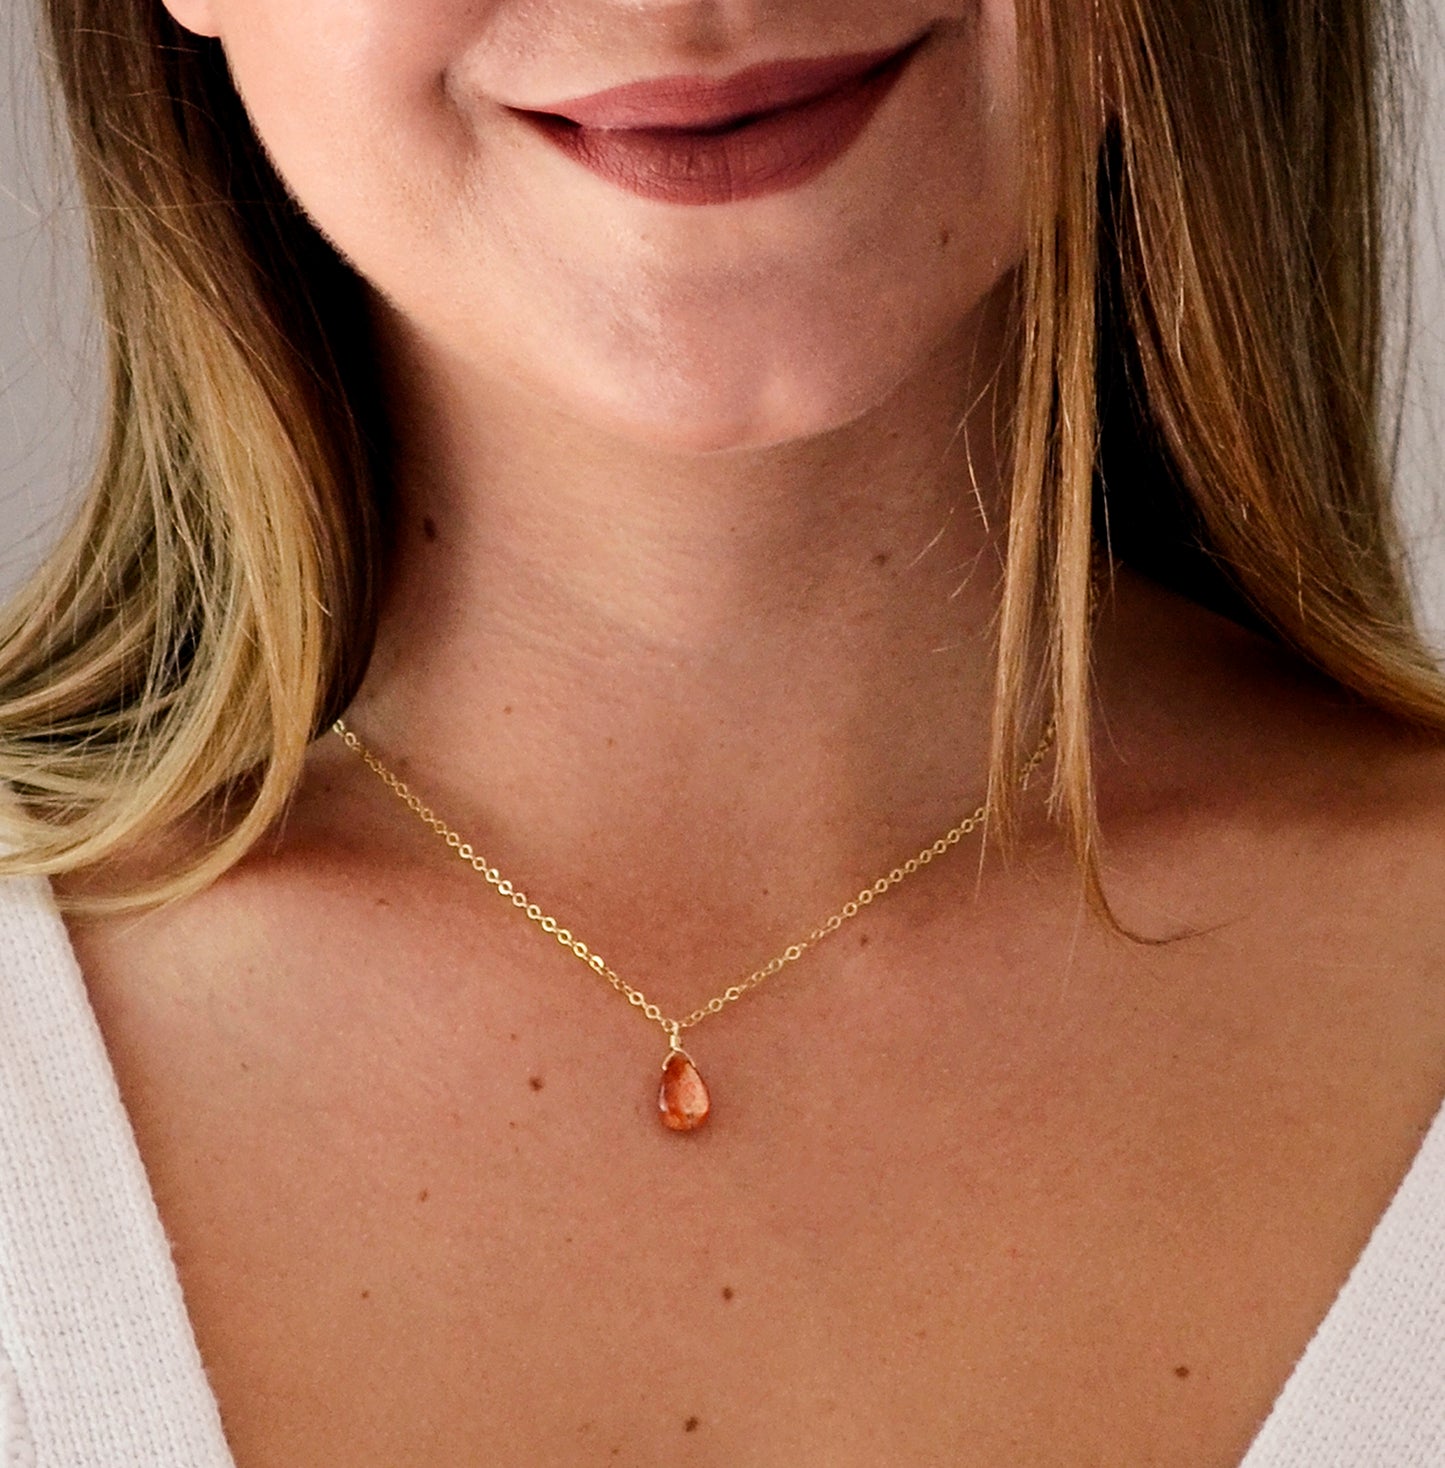 Orange Sunstone smooth polished teardrop pendant on a 14k gold filled chain. Modeled on a 16 inch chain.